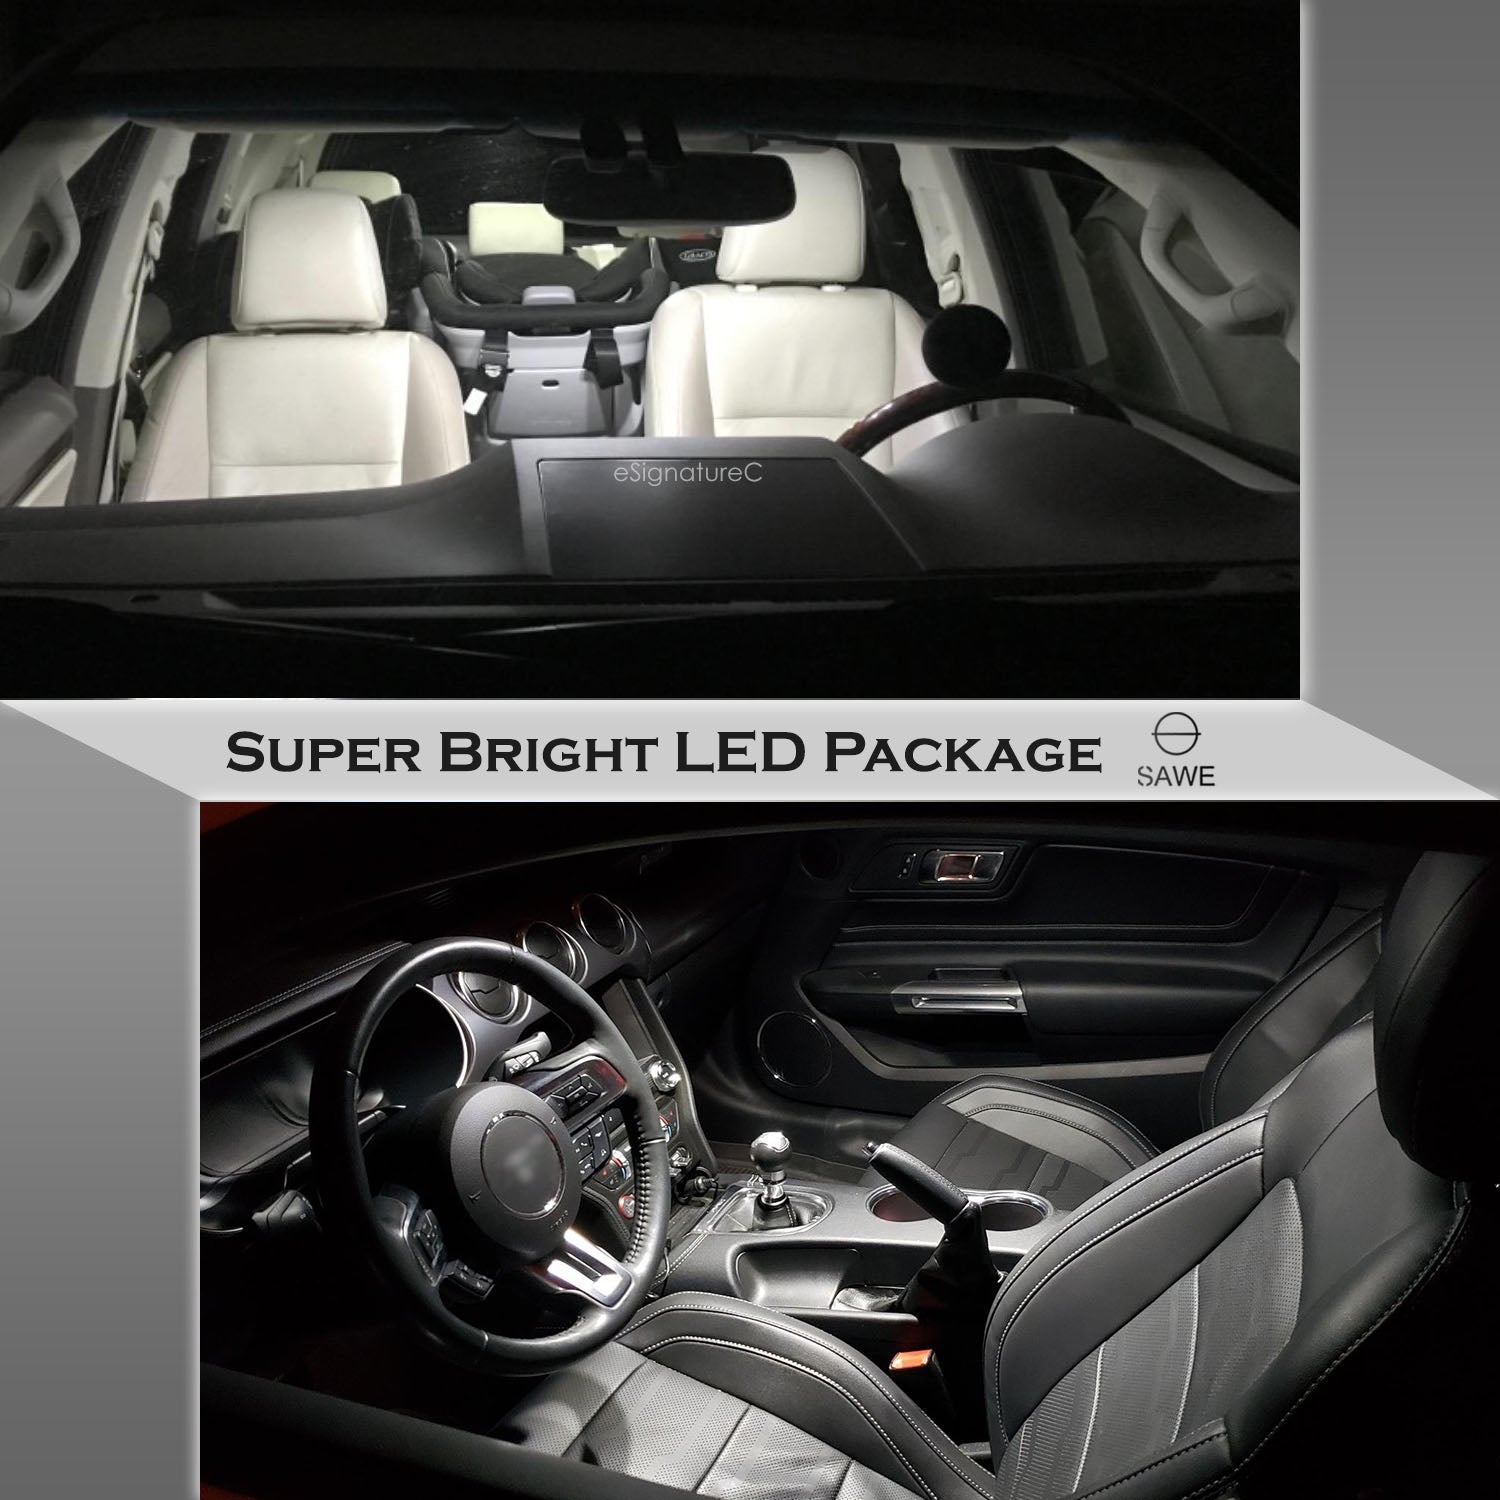 For BMW 535 550 F10 5 Series Interior LED Lights - Dome & Map Light Bulb Package Kit for 2011 - 2015 - White